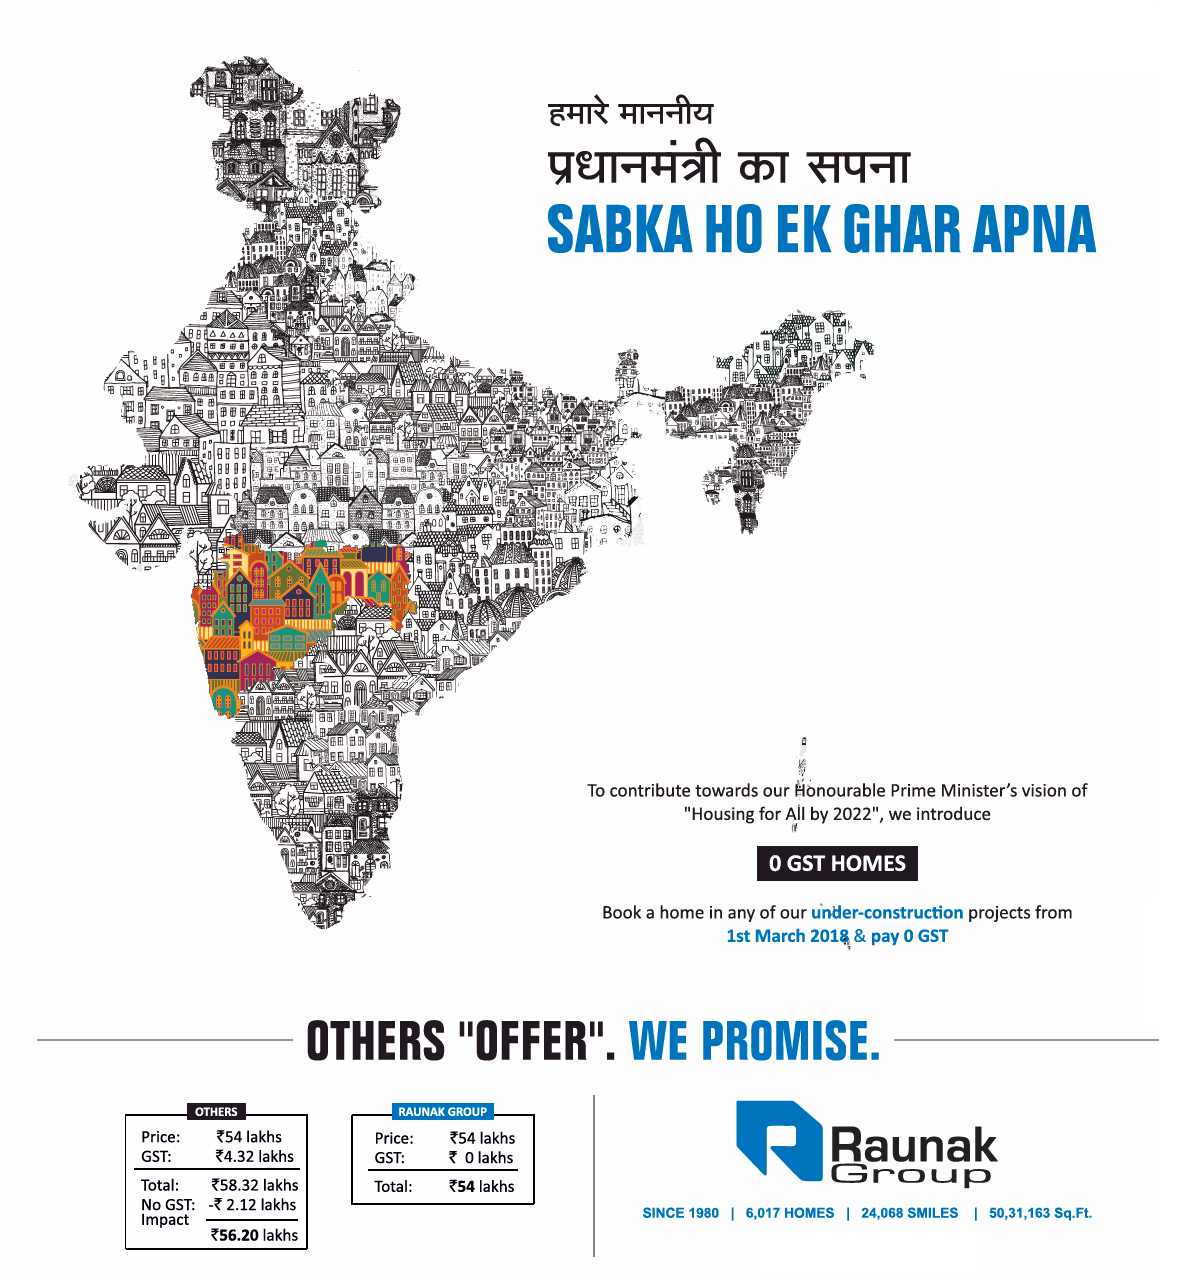 Book a home at any under construction projects of Raunak Group & pay Zero GST Update